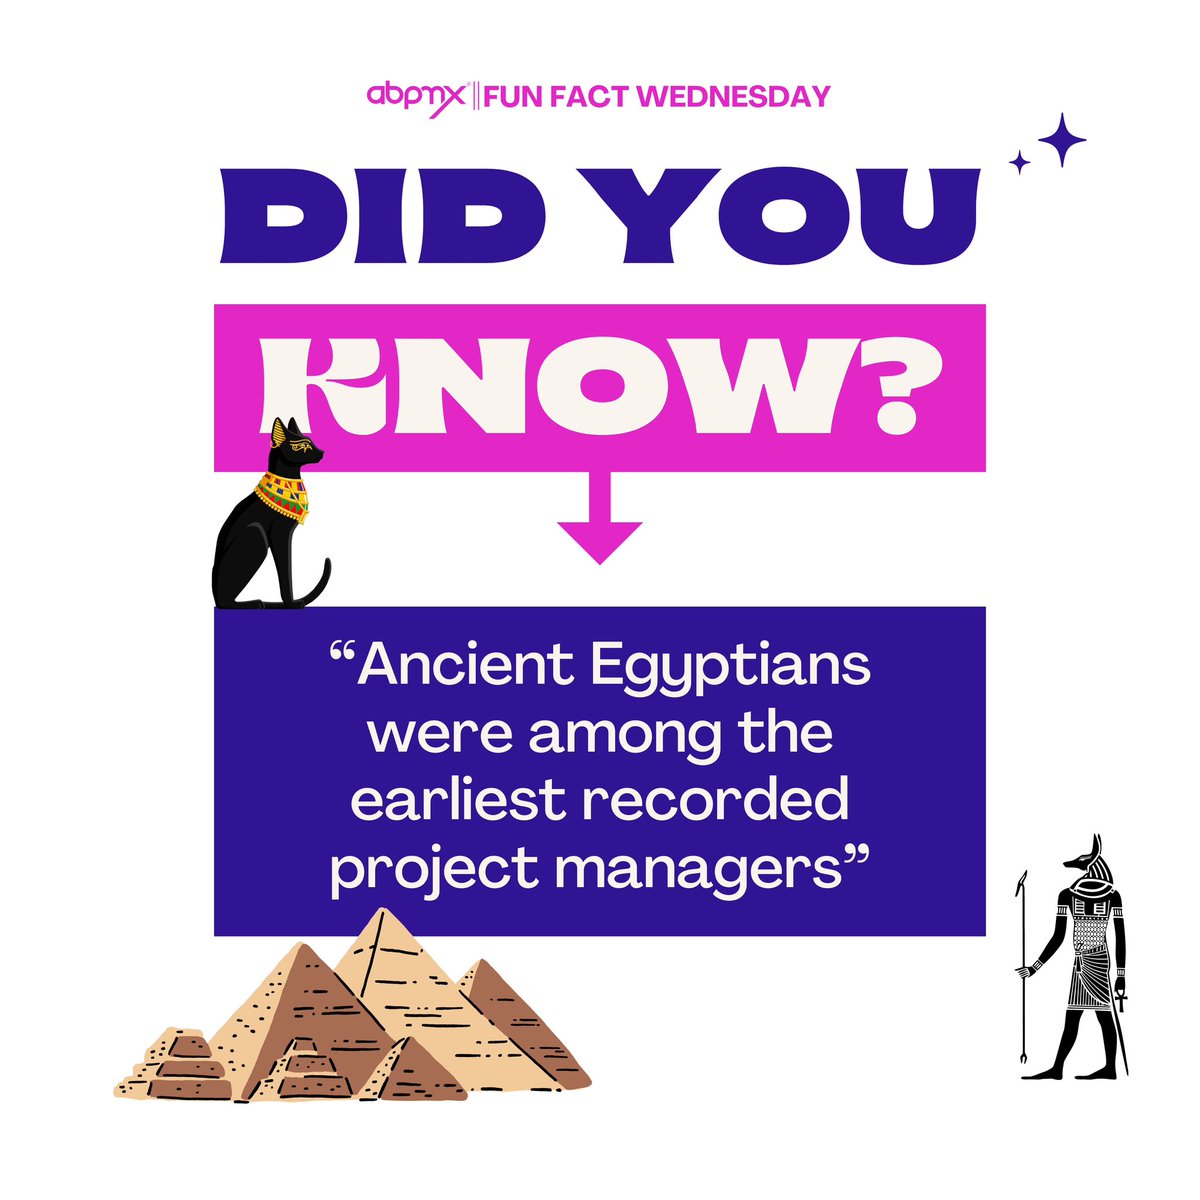 The Great Pyramids of Giza are a testament to the success of early project management. These massive structures required complex planning, resource allocation, and coordination of a huge workforce – all skills that are essential in project management today.